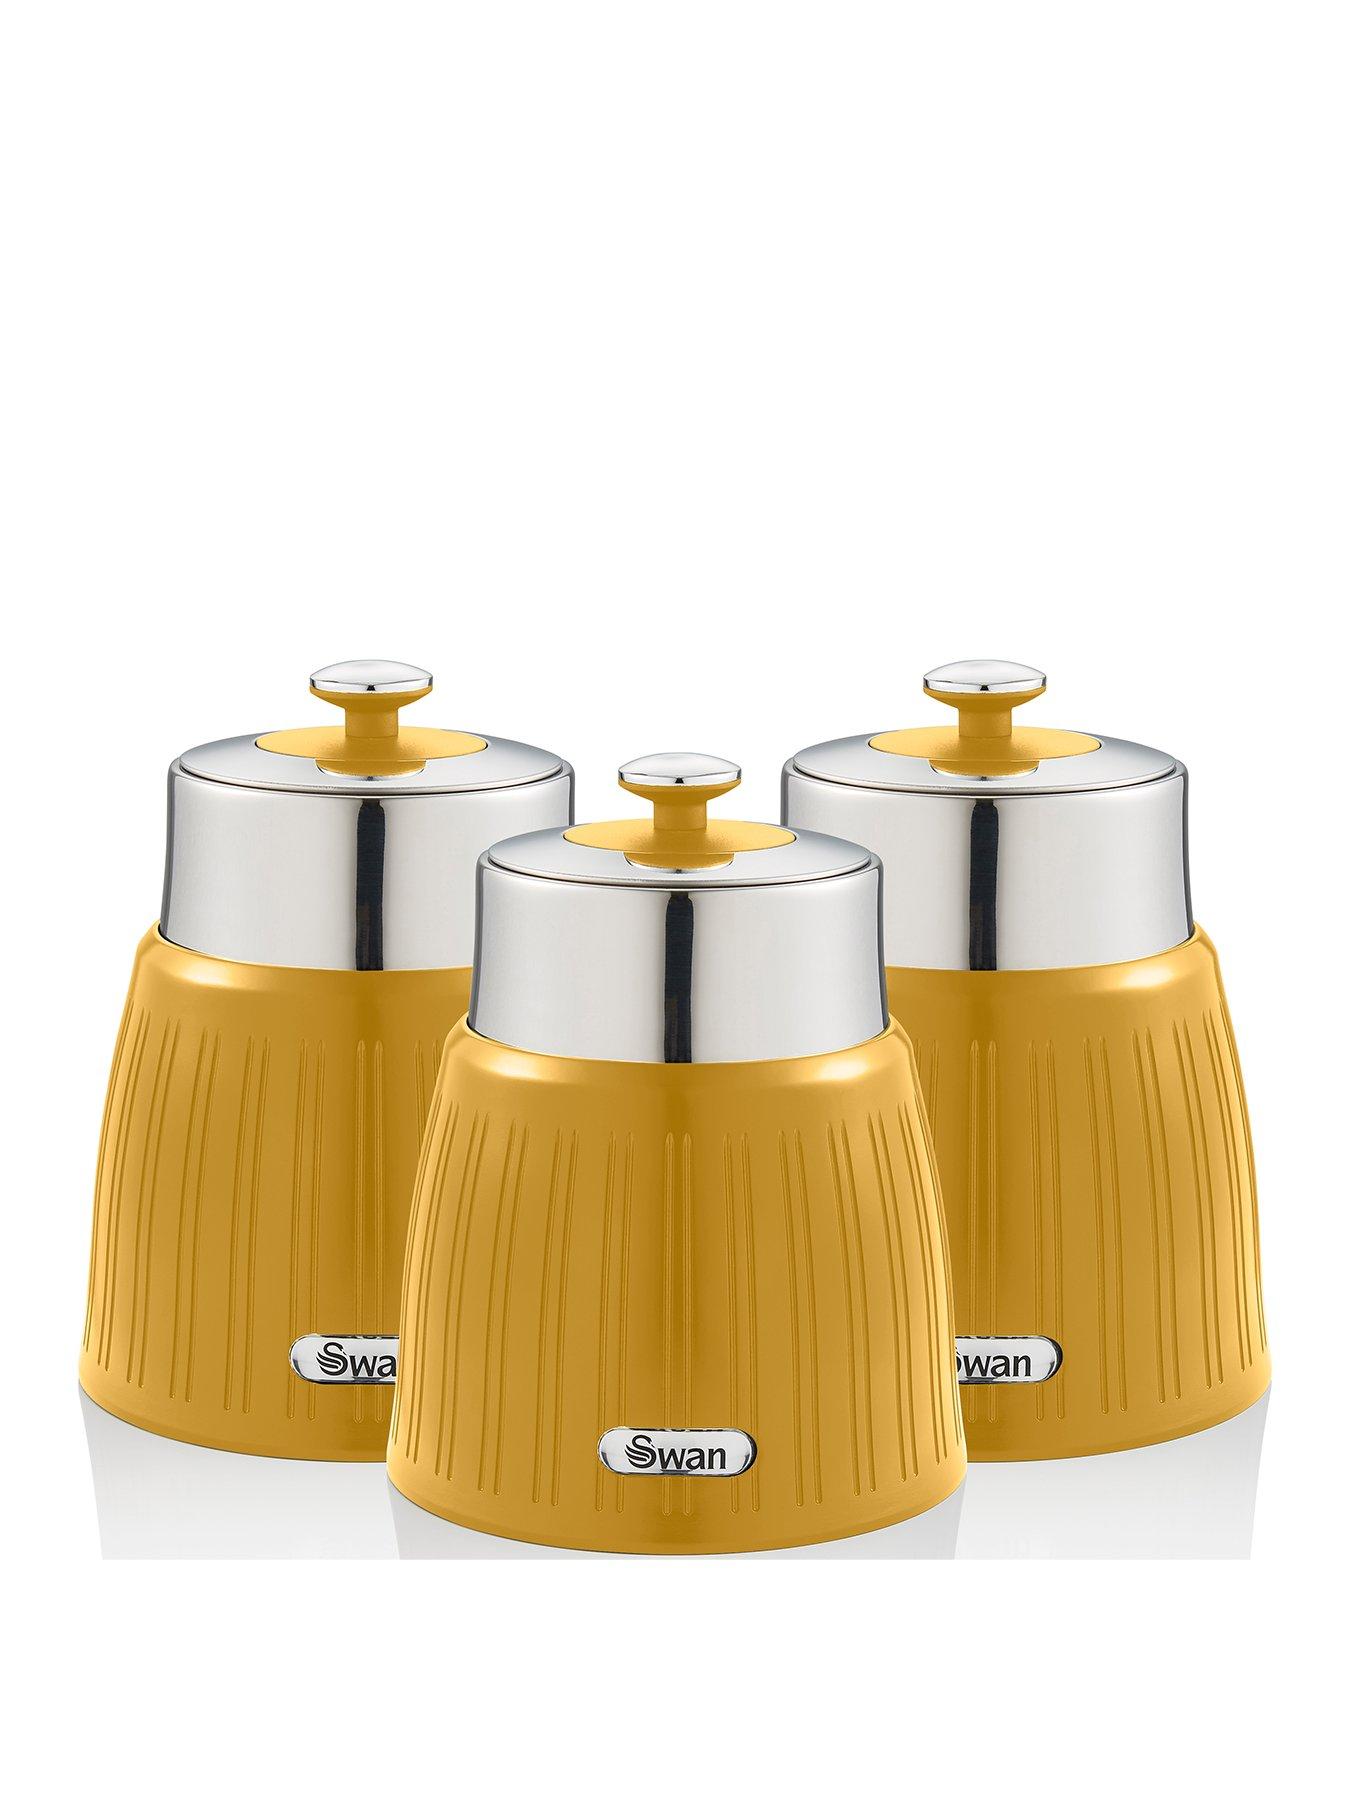 Swan Retro Set of 3 Storage Canisters – Yellow | littlewoods.com